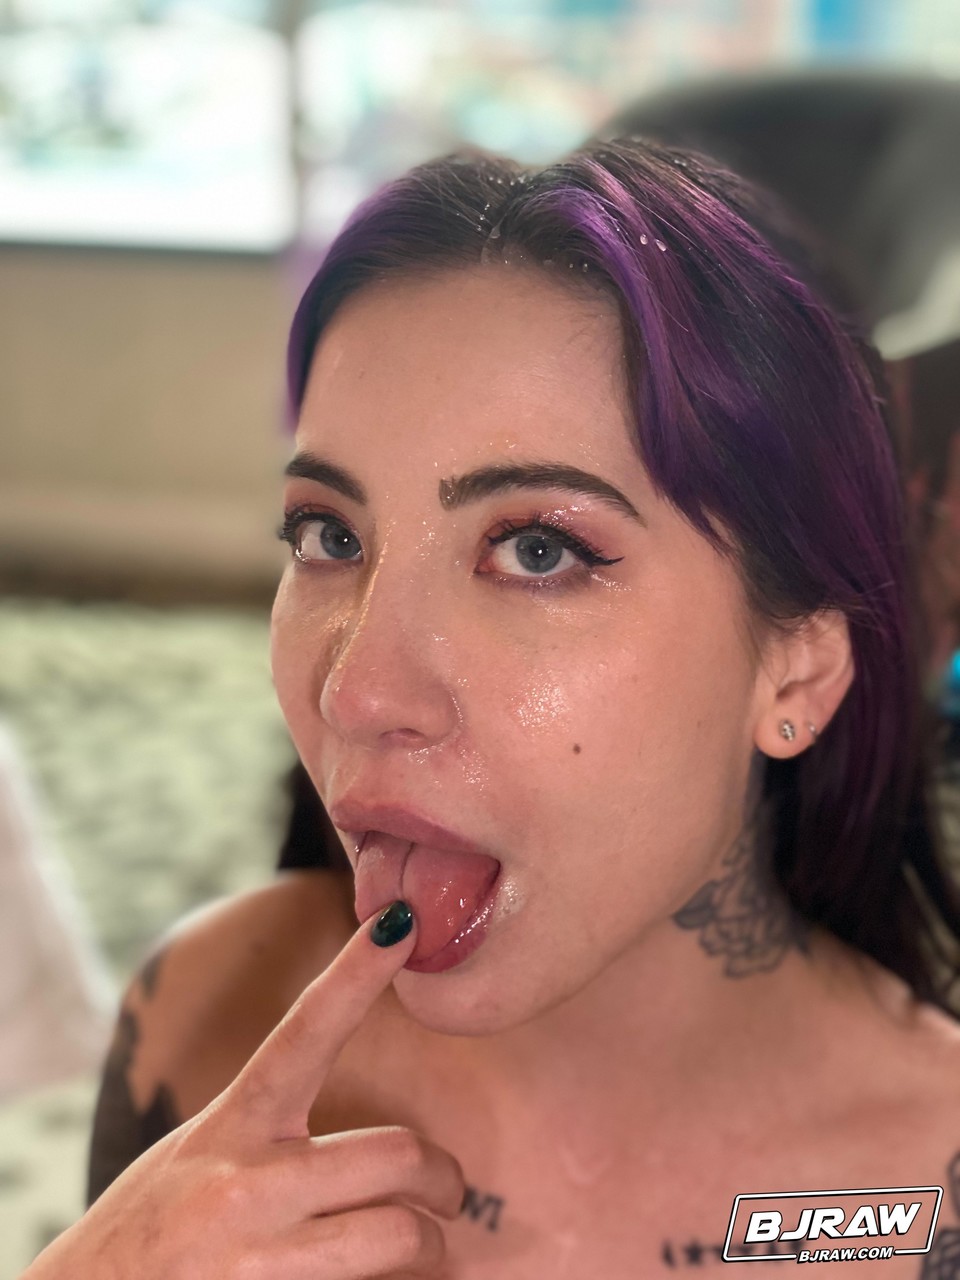 Brunette babe with tattoos Charlotte Sartre takes a dick in her mouth ポルノ写真 #424561435 | BJ Raw Pics, Charlotte Sartre, Tattoo, モバイルポルノ